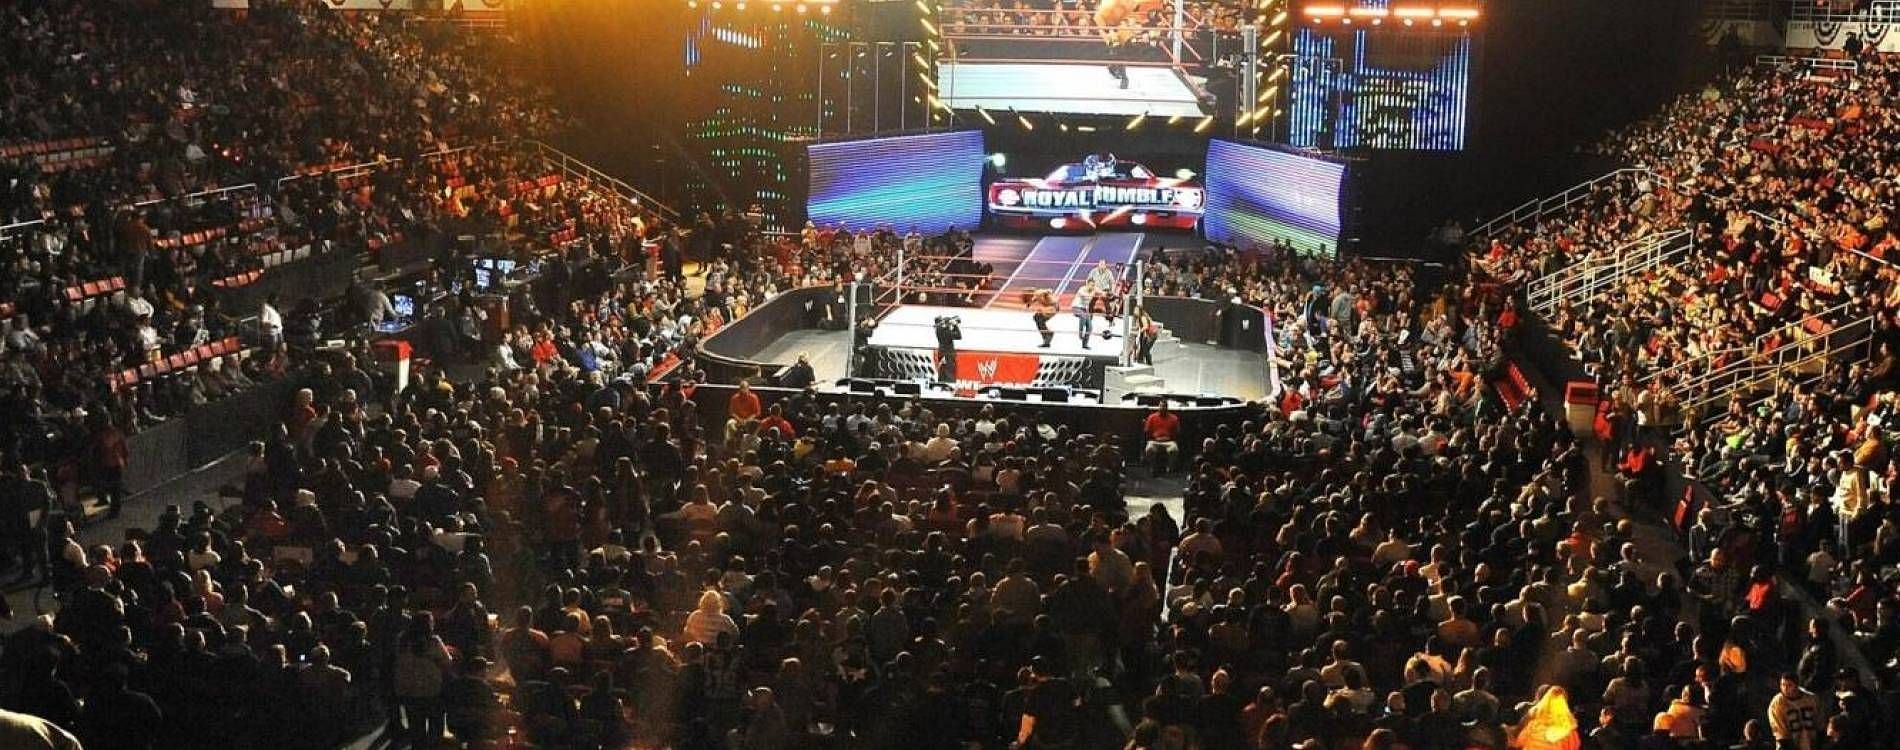 WWE has declined any &quot;updated production&quot; ideas for Day 1